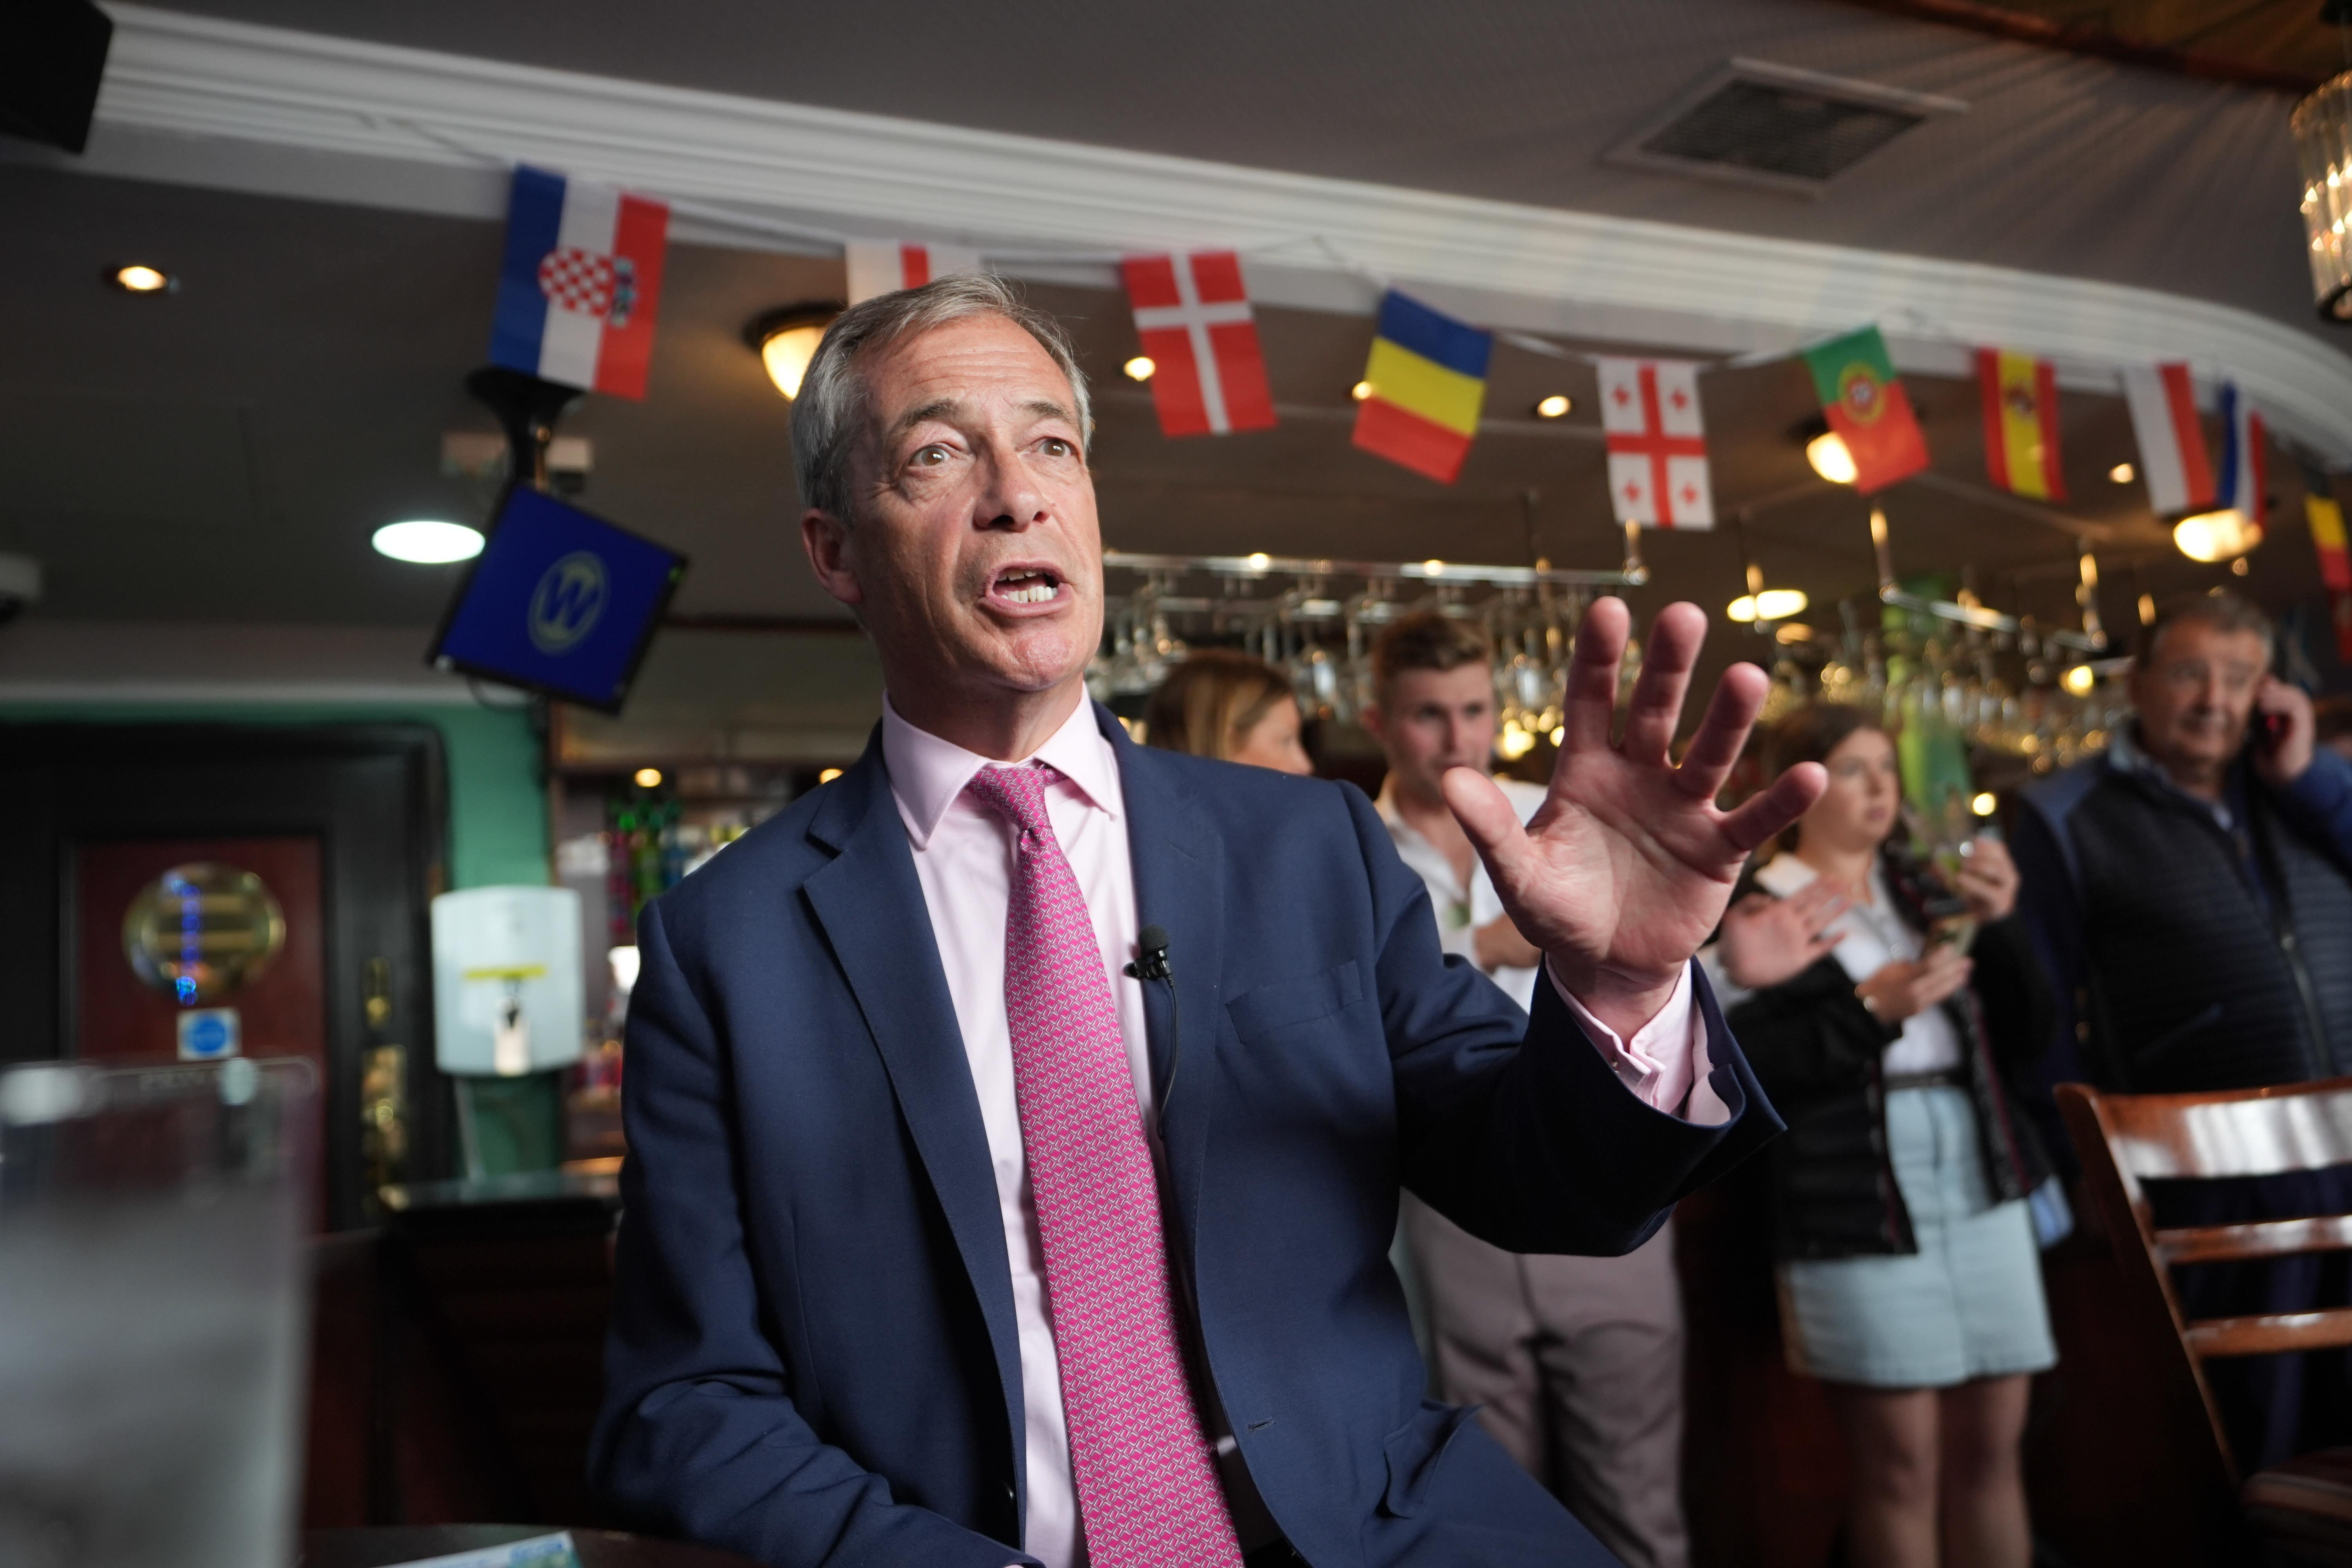 The event will mark Mr Farage’s first debate appearance since his shock takeover as leader of Reform UK (James Manning/PA)